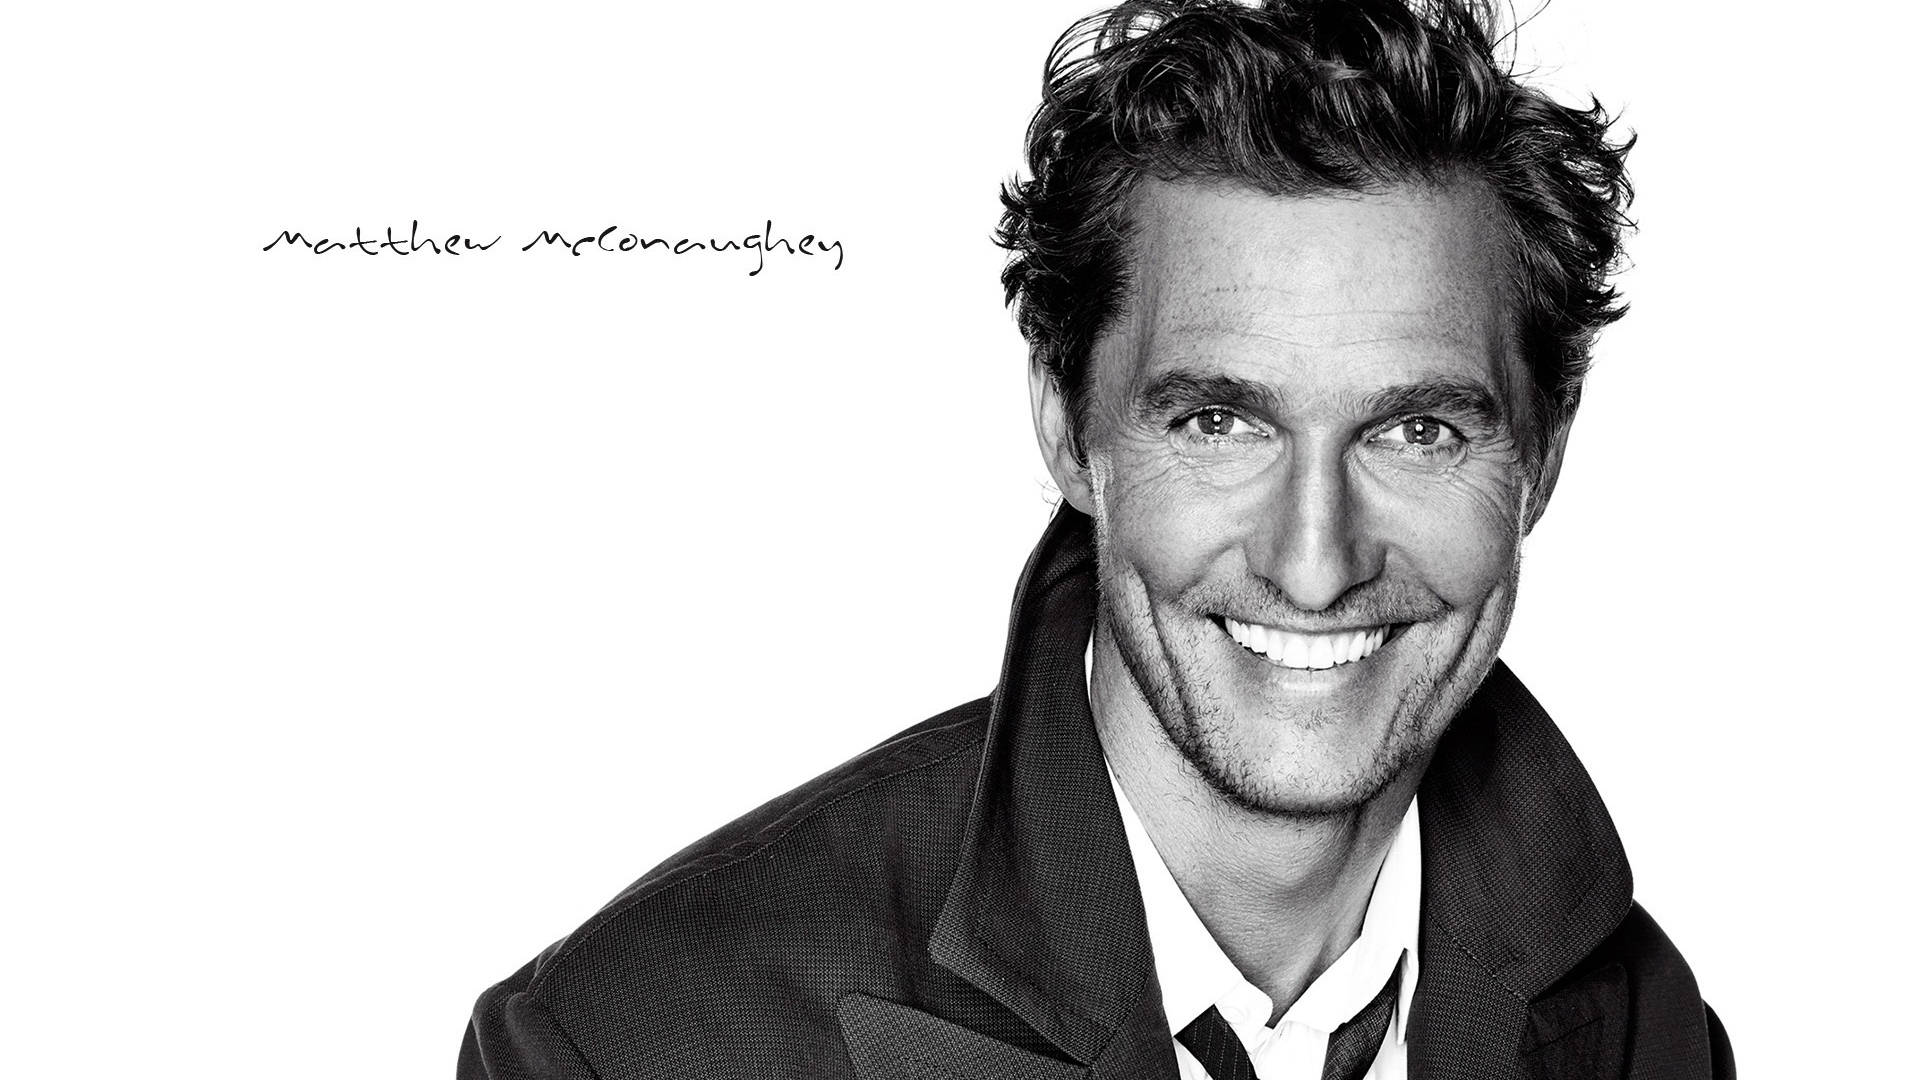 Captivating Smile From Matthew Mcconaughey Wallpaper